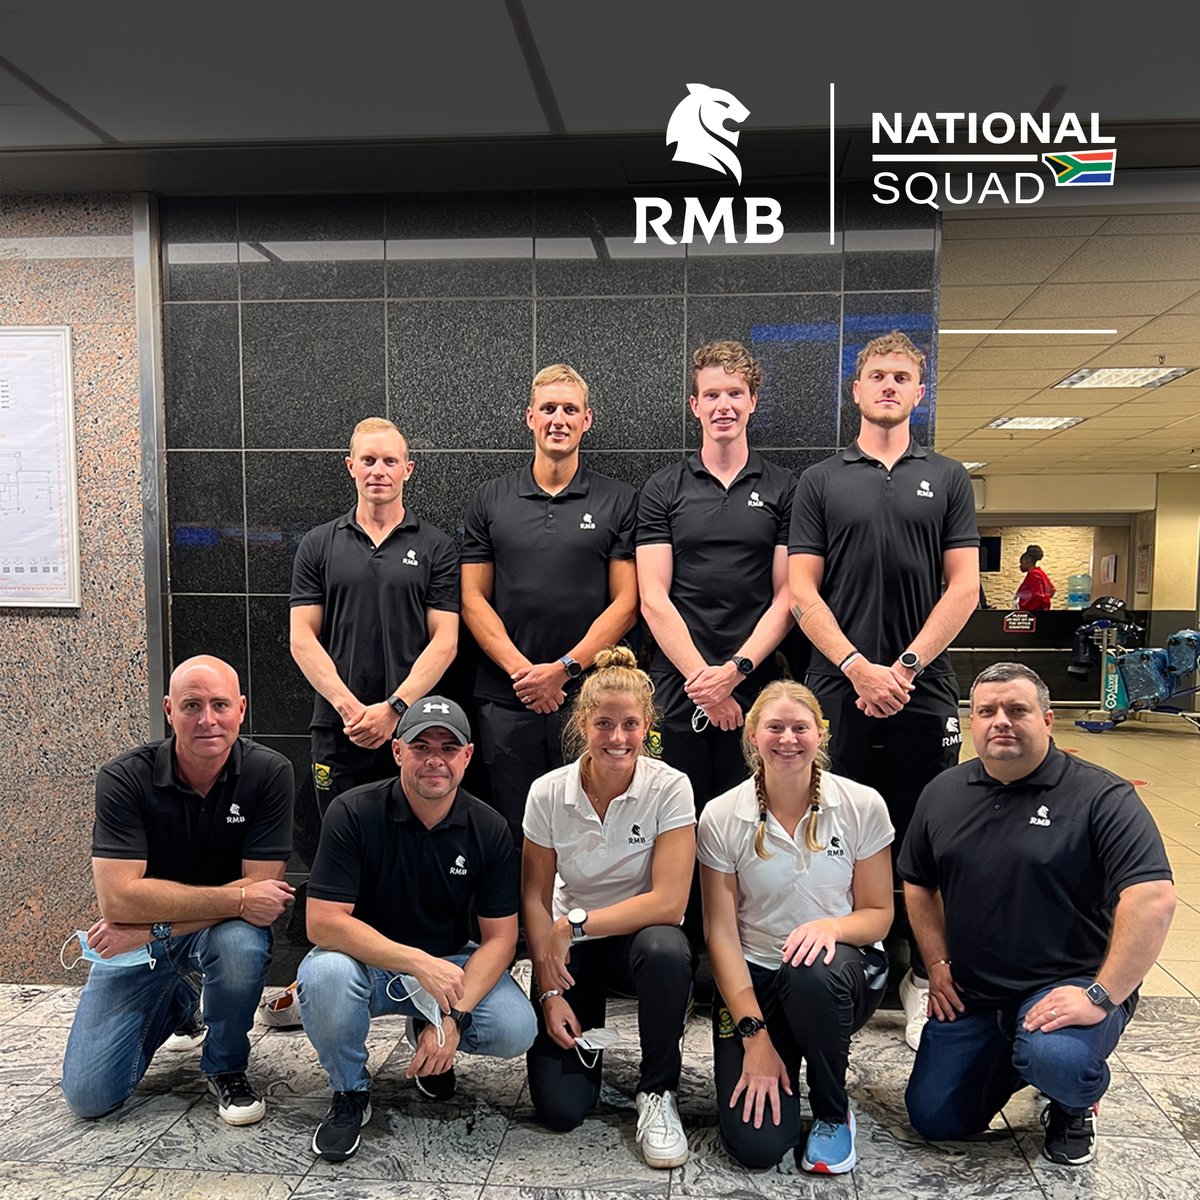 We’re wishing the #RMBNationalSquad all the best as they compete in the final series of the World Rowing Cup III in Lucerne, Switzerland from 7-9 July. 🇿🇦 @RowingRSA @WorldRowing 
#RowingRSA #WorldRowingCup #WRCLucerne